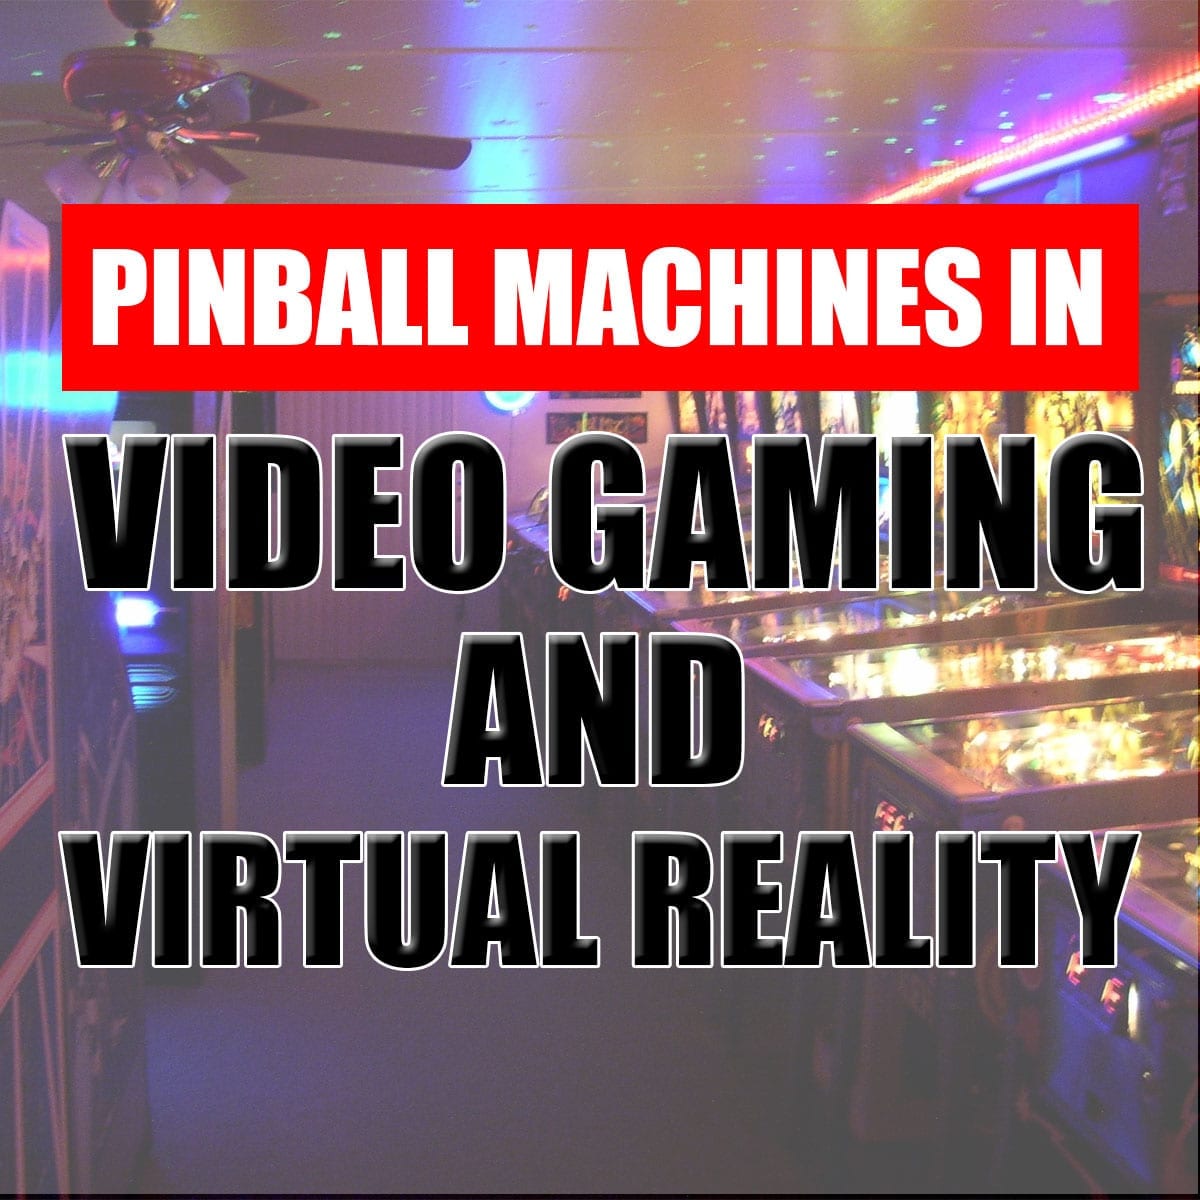 Pinball Machines in Video Gaming and Virtual Reality